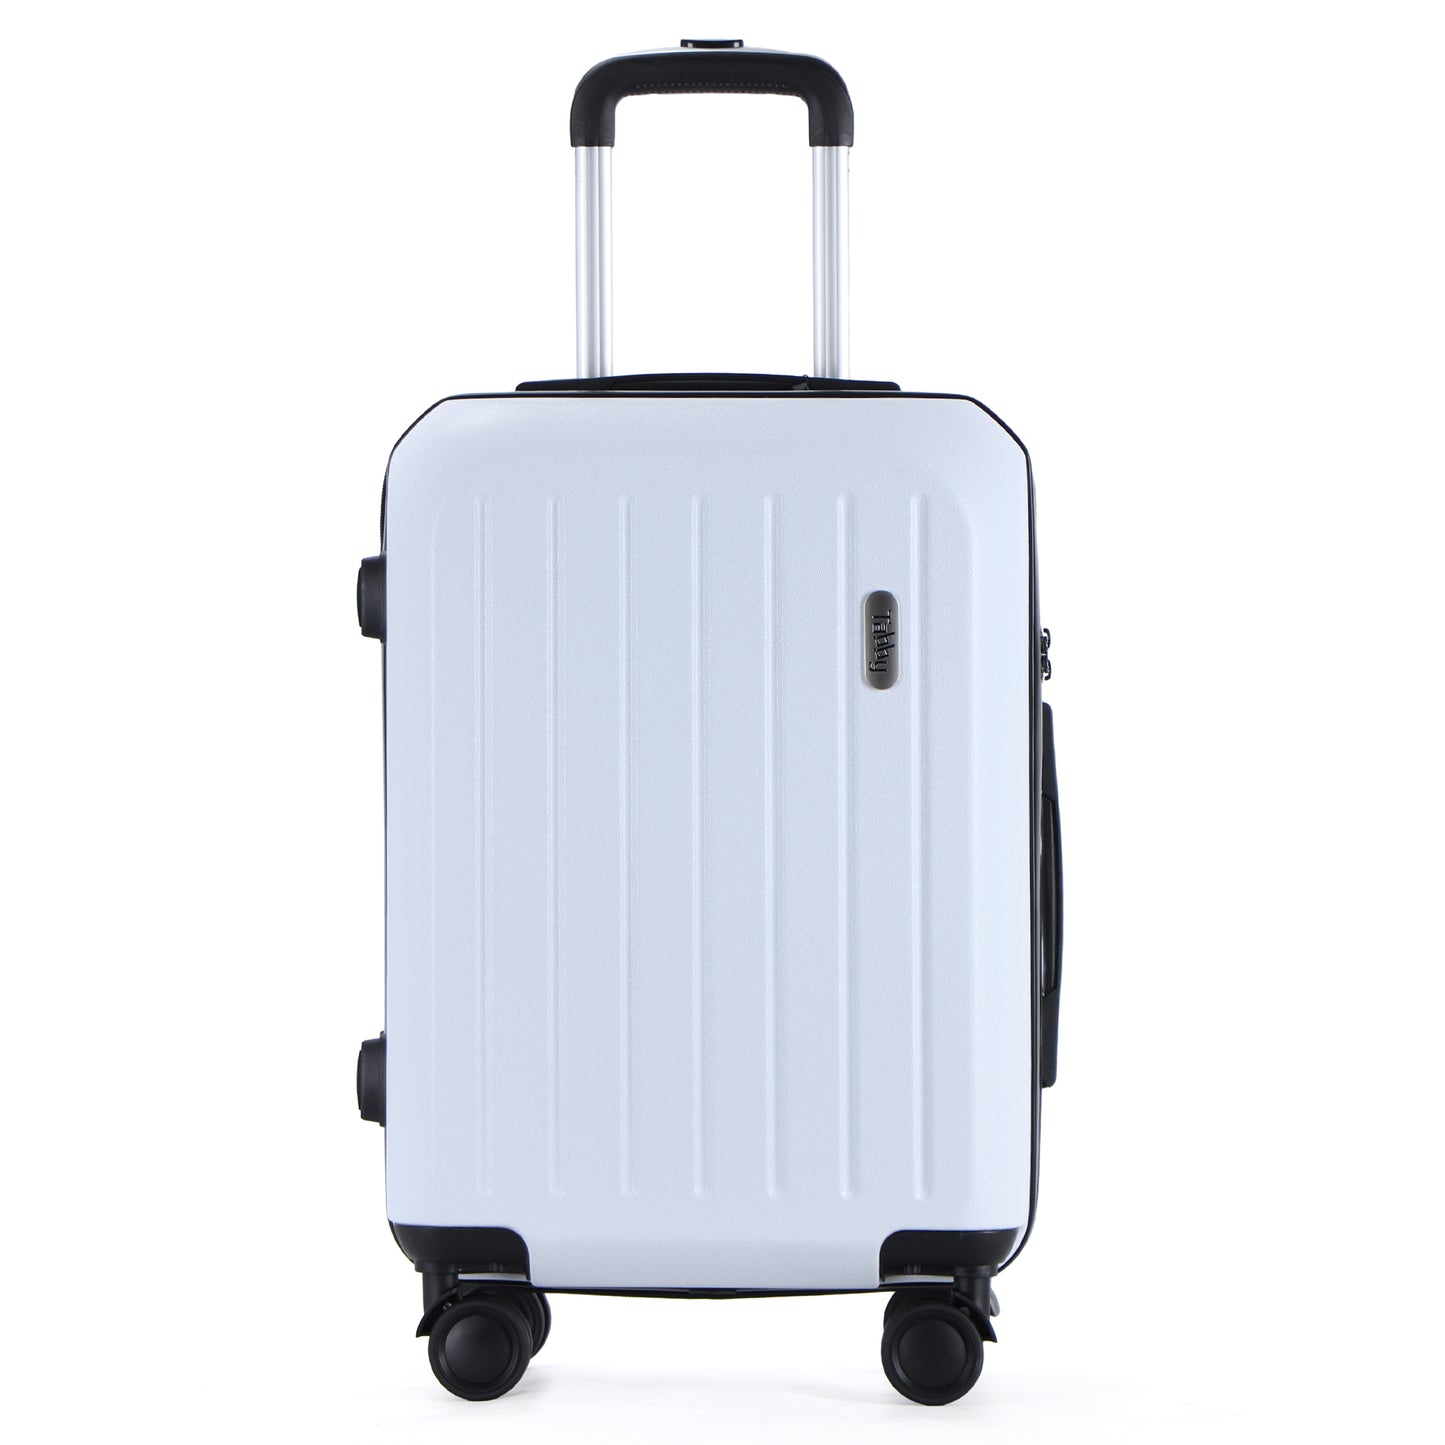 Easy Luggage Tabby Deluxe: ABS Suitcase with 4 Wheels, TSA Lock, Aluminum Frame - 20", 24", 28" Sizes - White